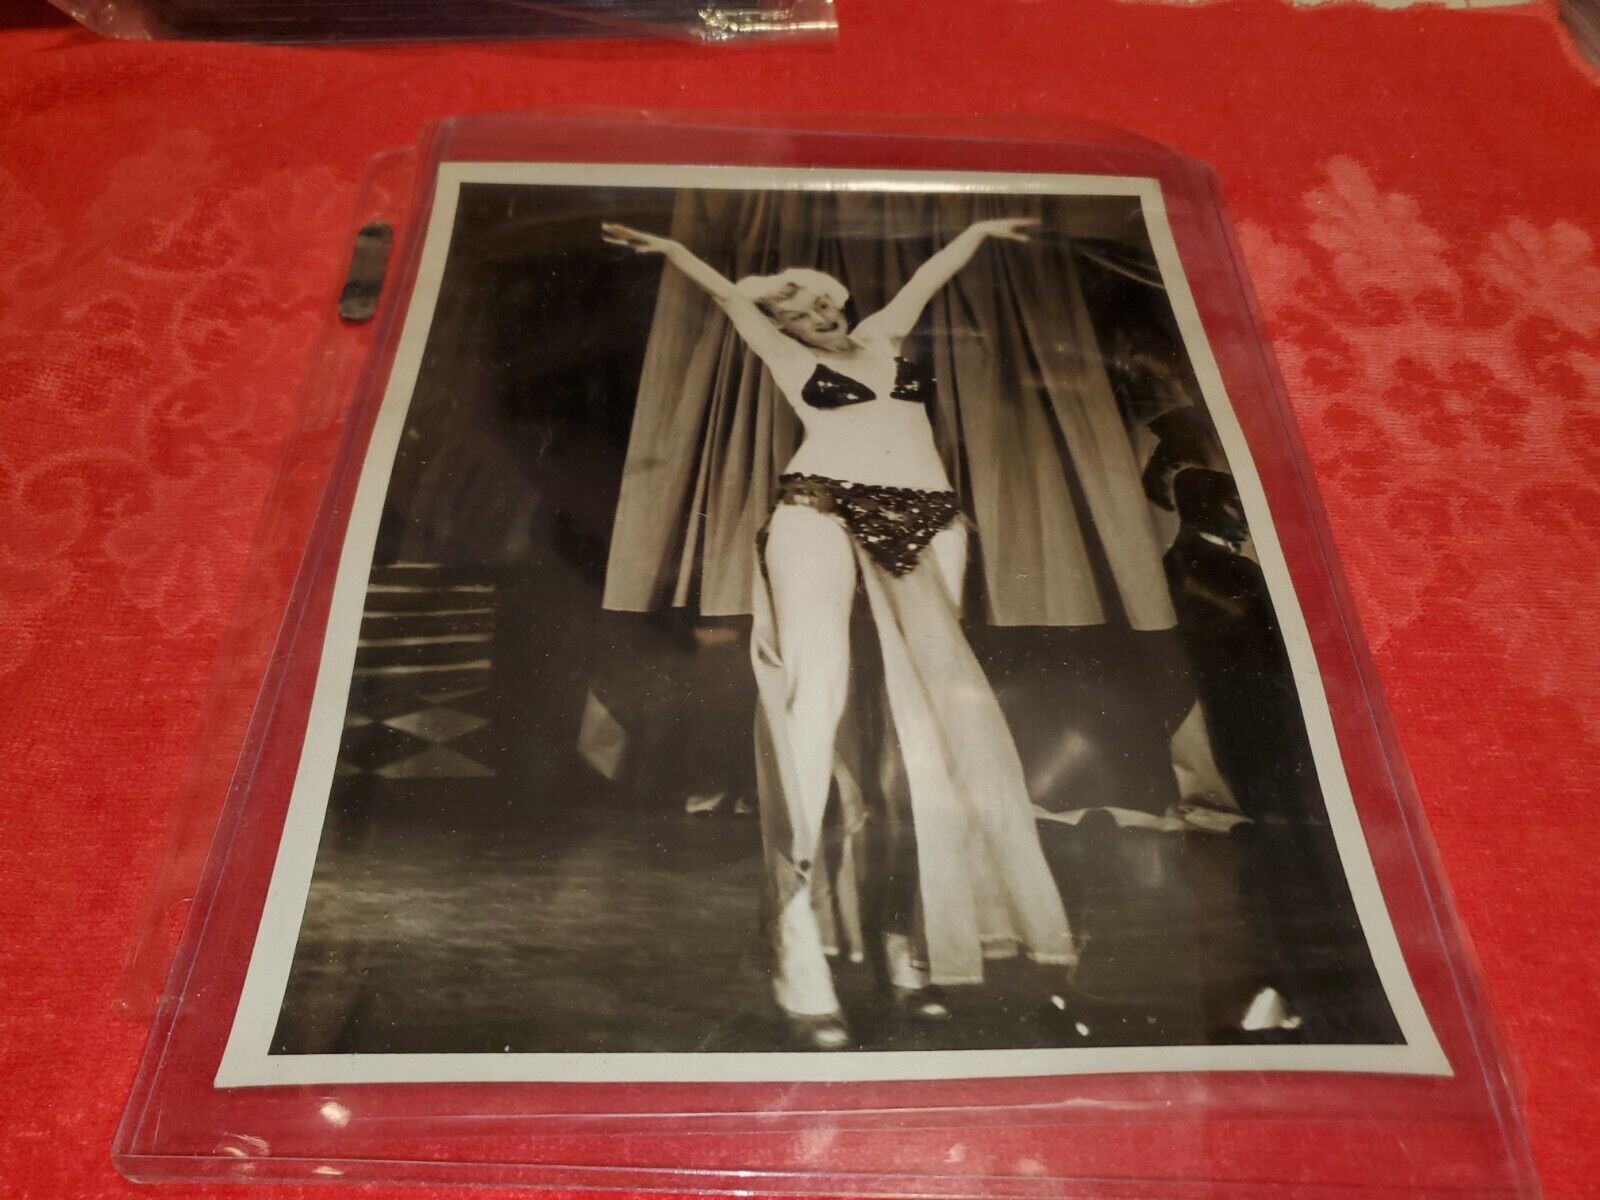 VINTAGE 1950s BURLESQUE 8 X 10 PHOTO OF UNKNOWN DANCER FROM  G & S FILM CO